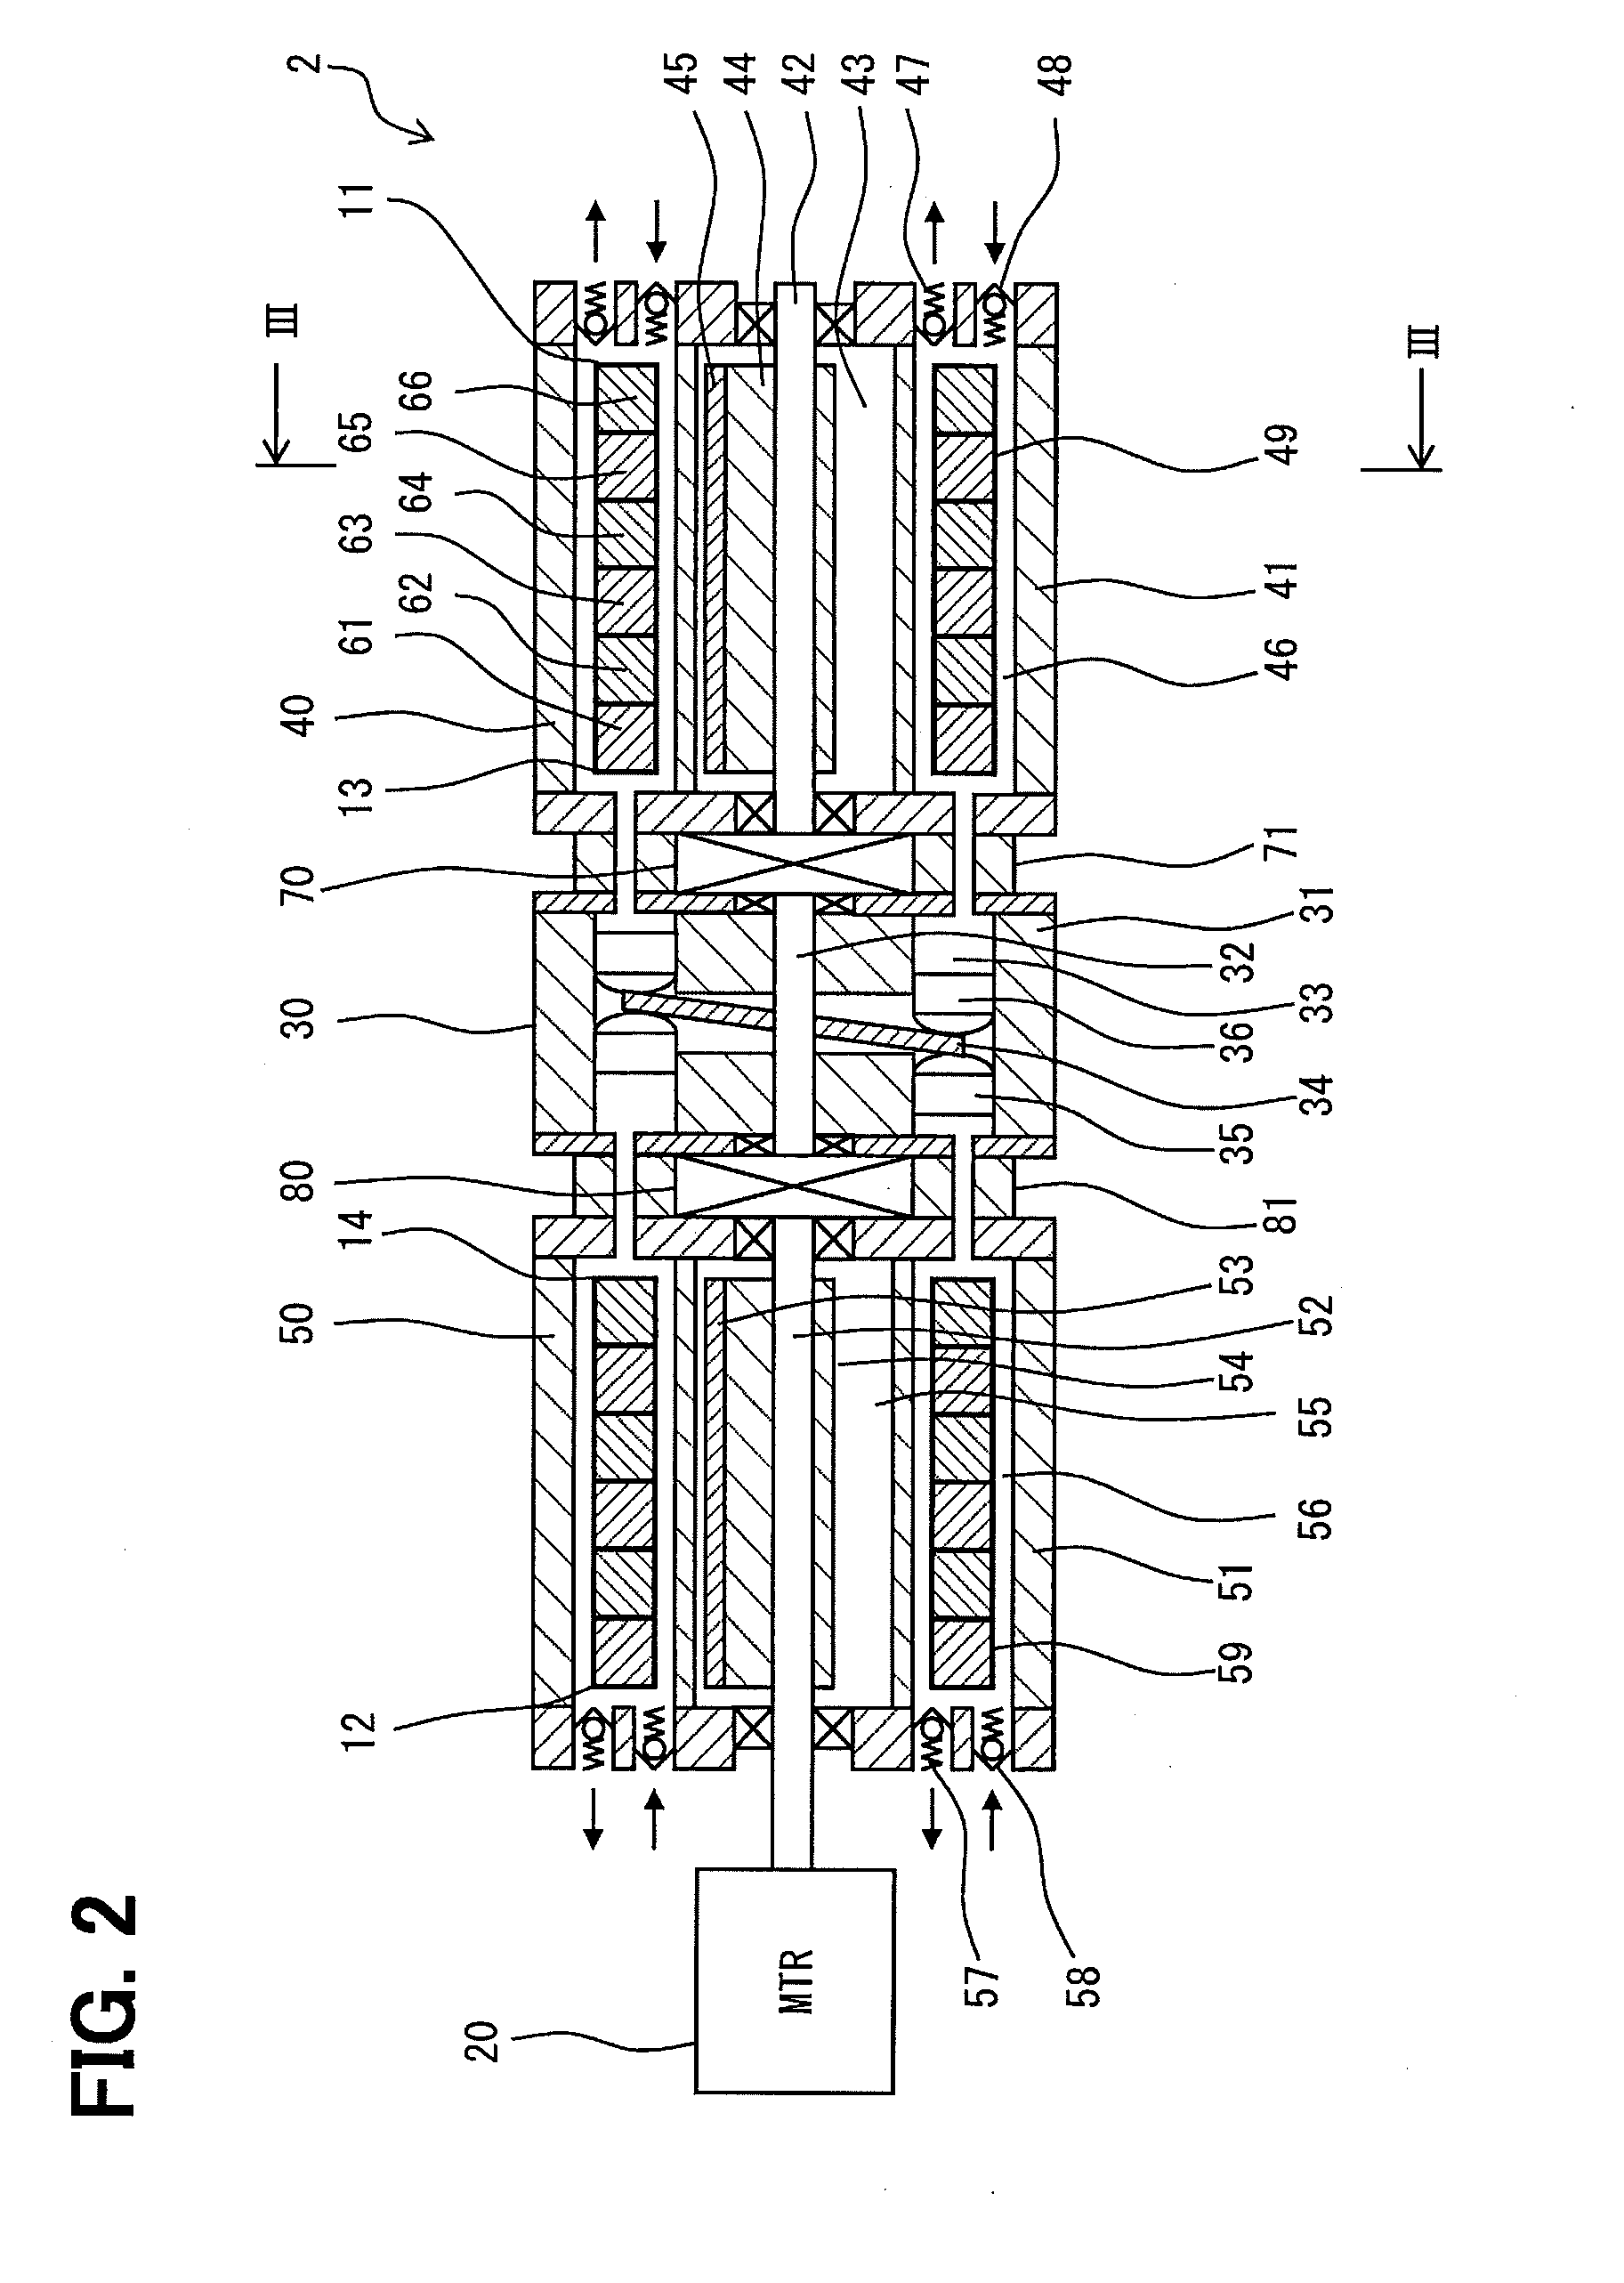 Magneto-caloric effect element and thermo-magnetic cycle apparatus